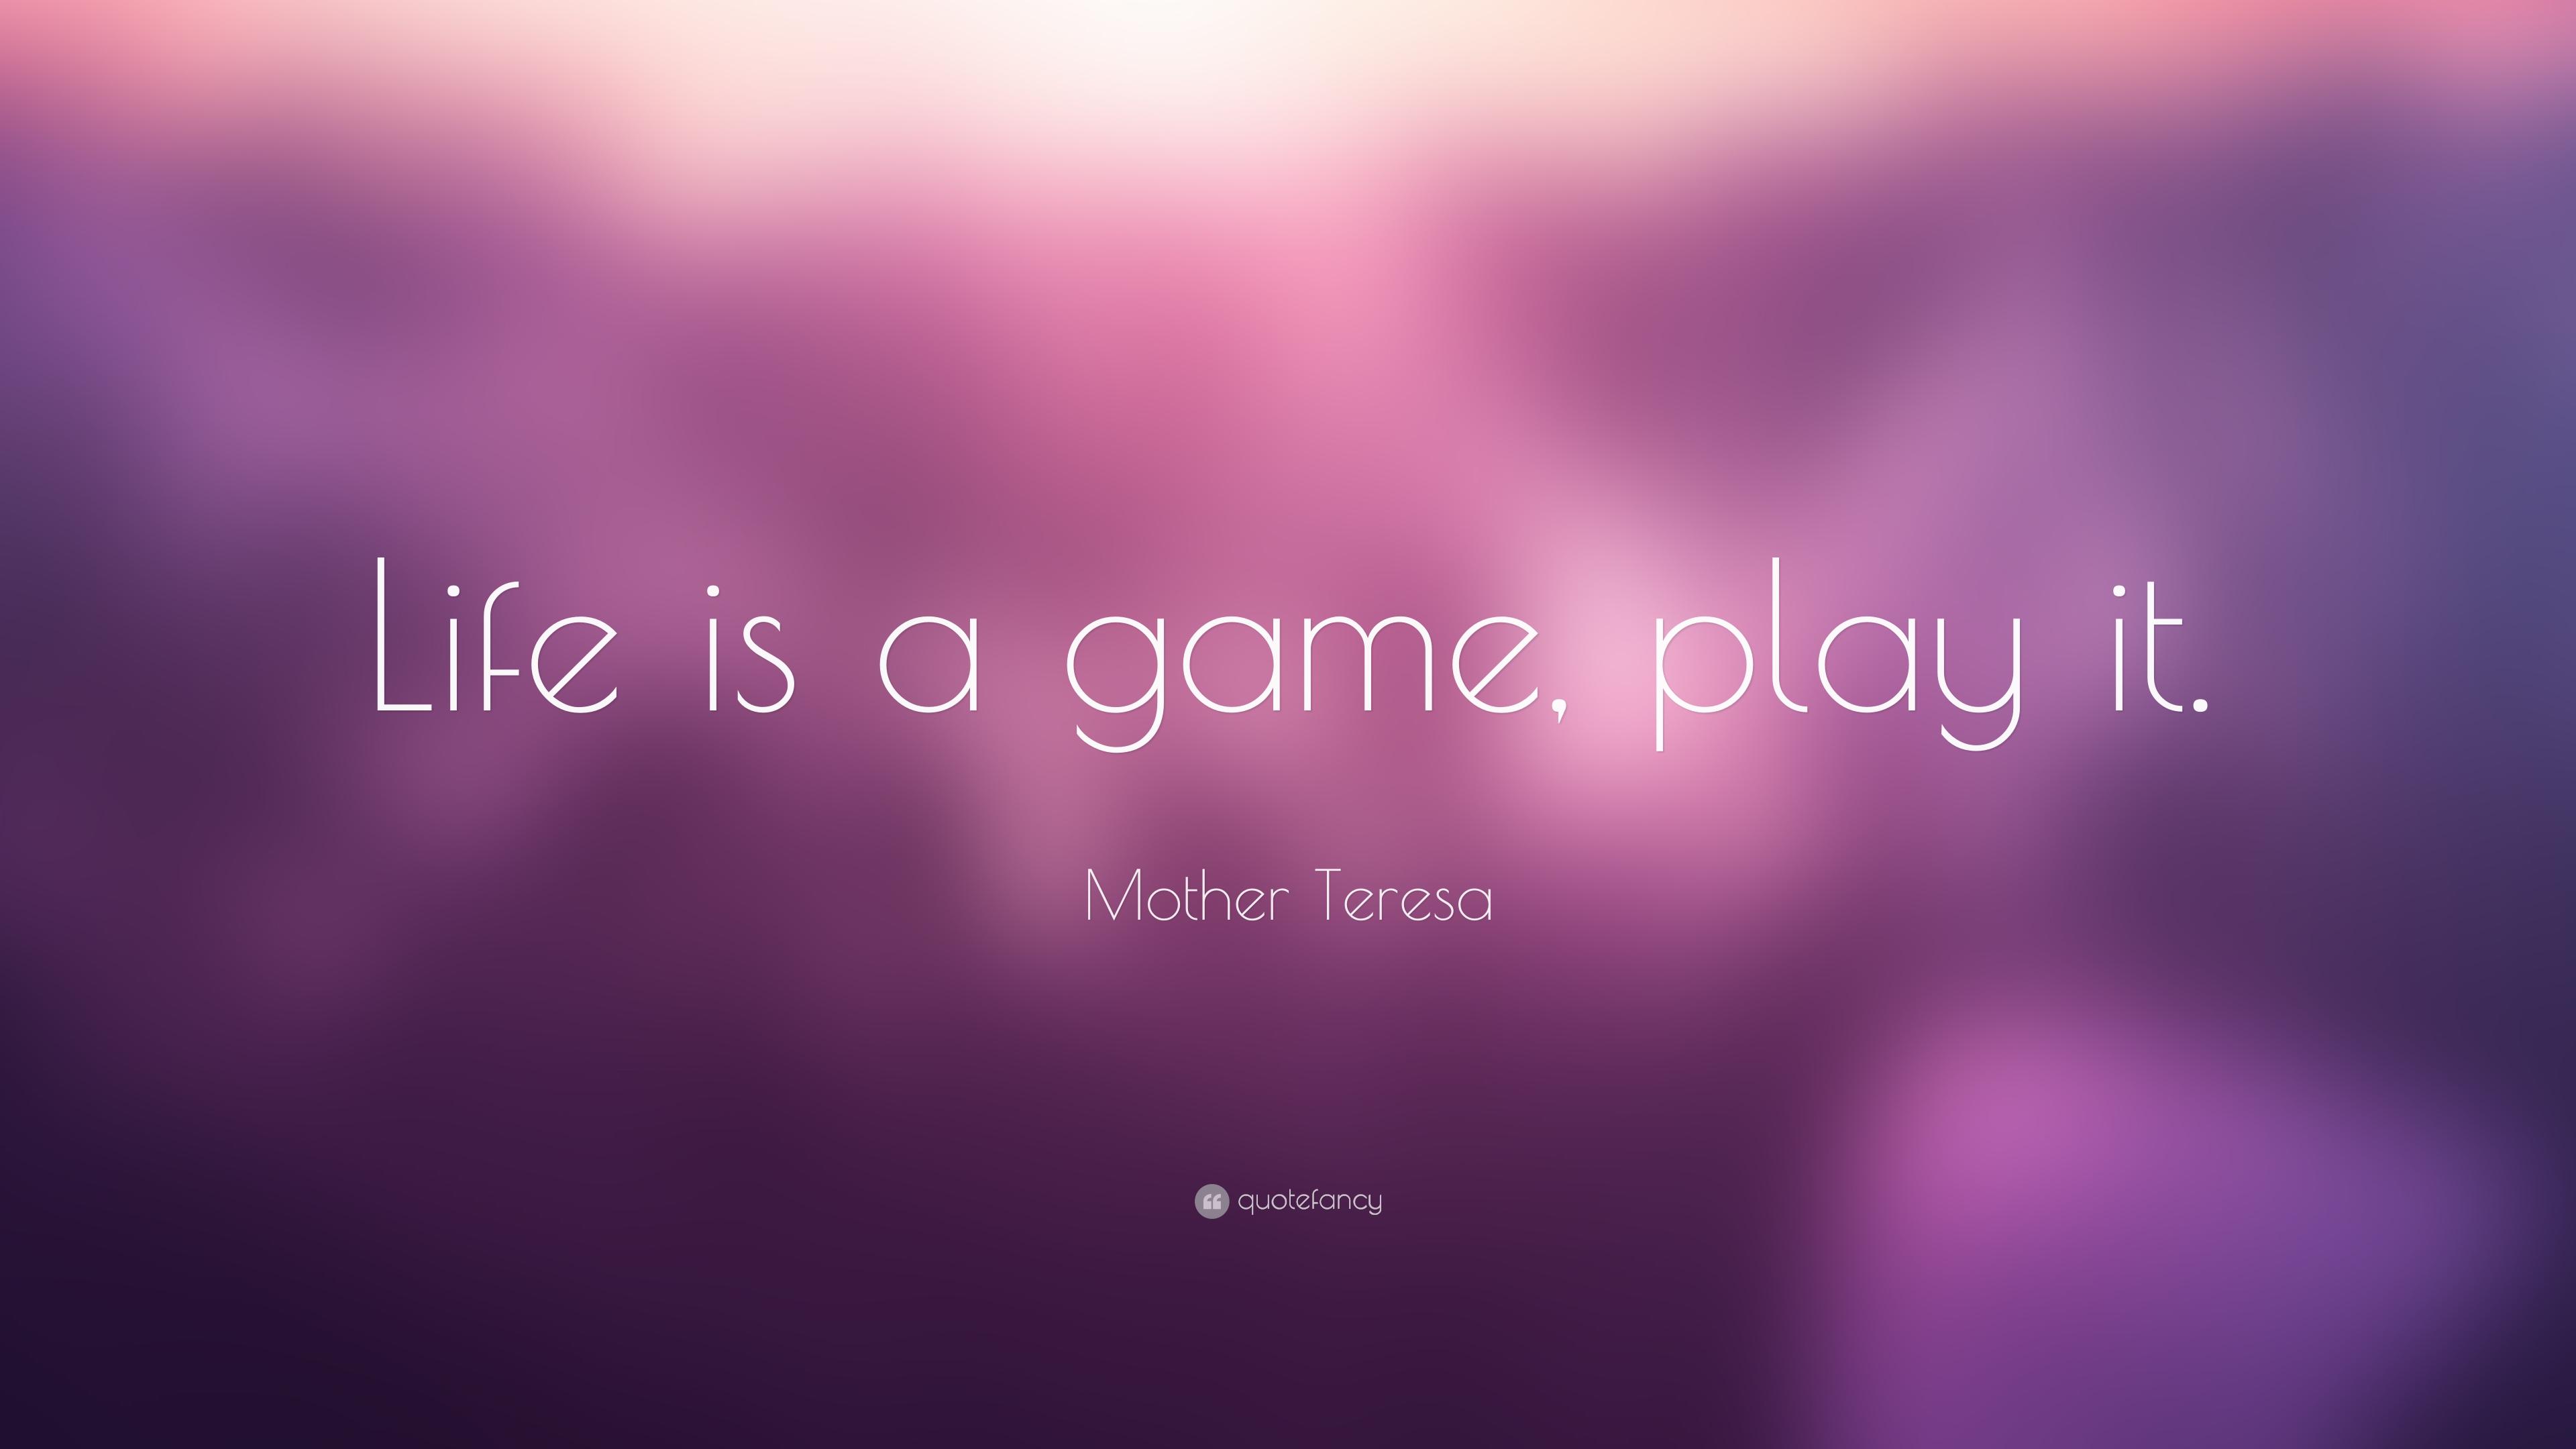 Mother Teresa Quote: “Life is a game, play it.” 18 wallpaper